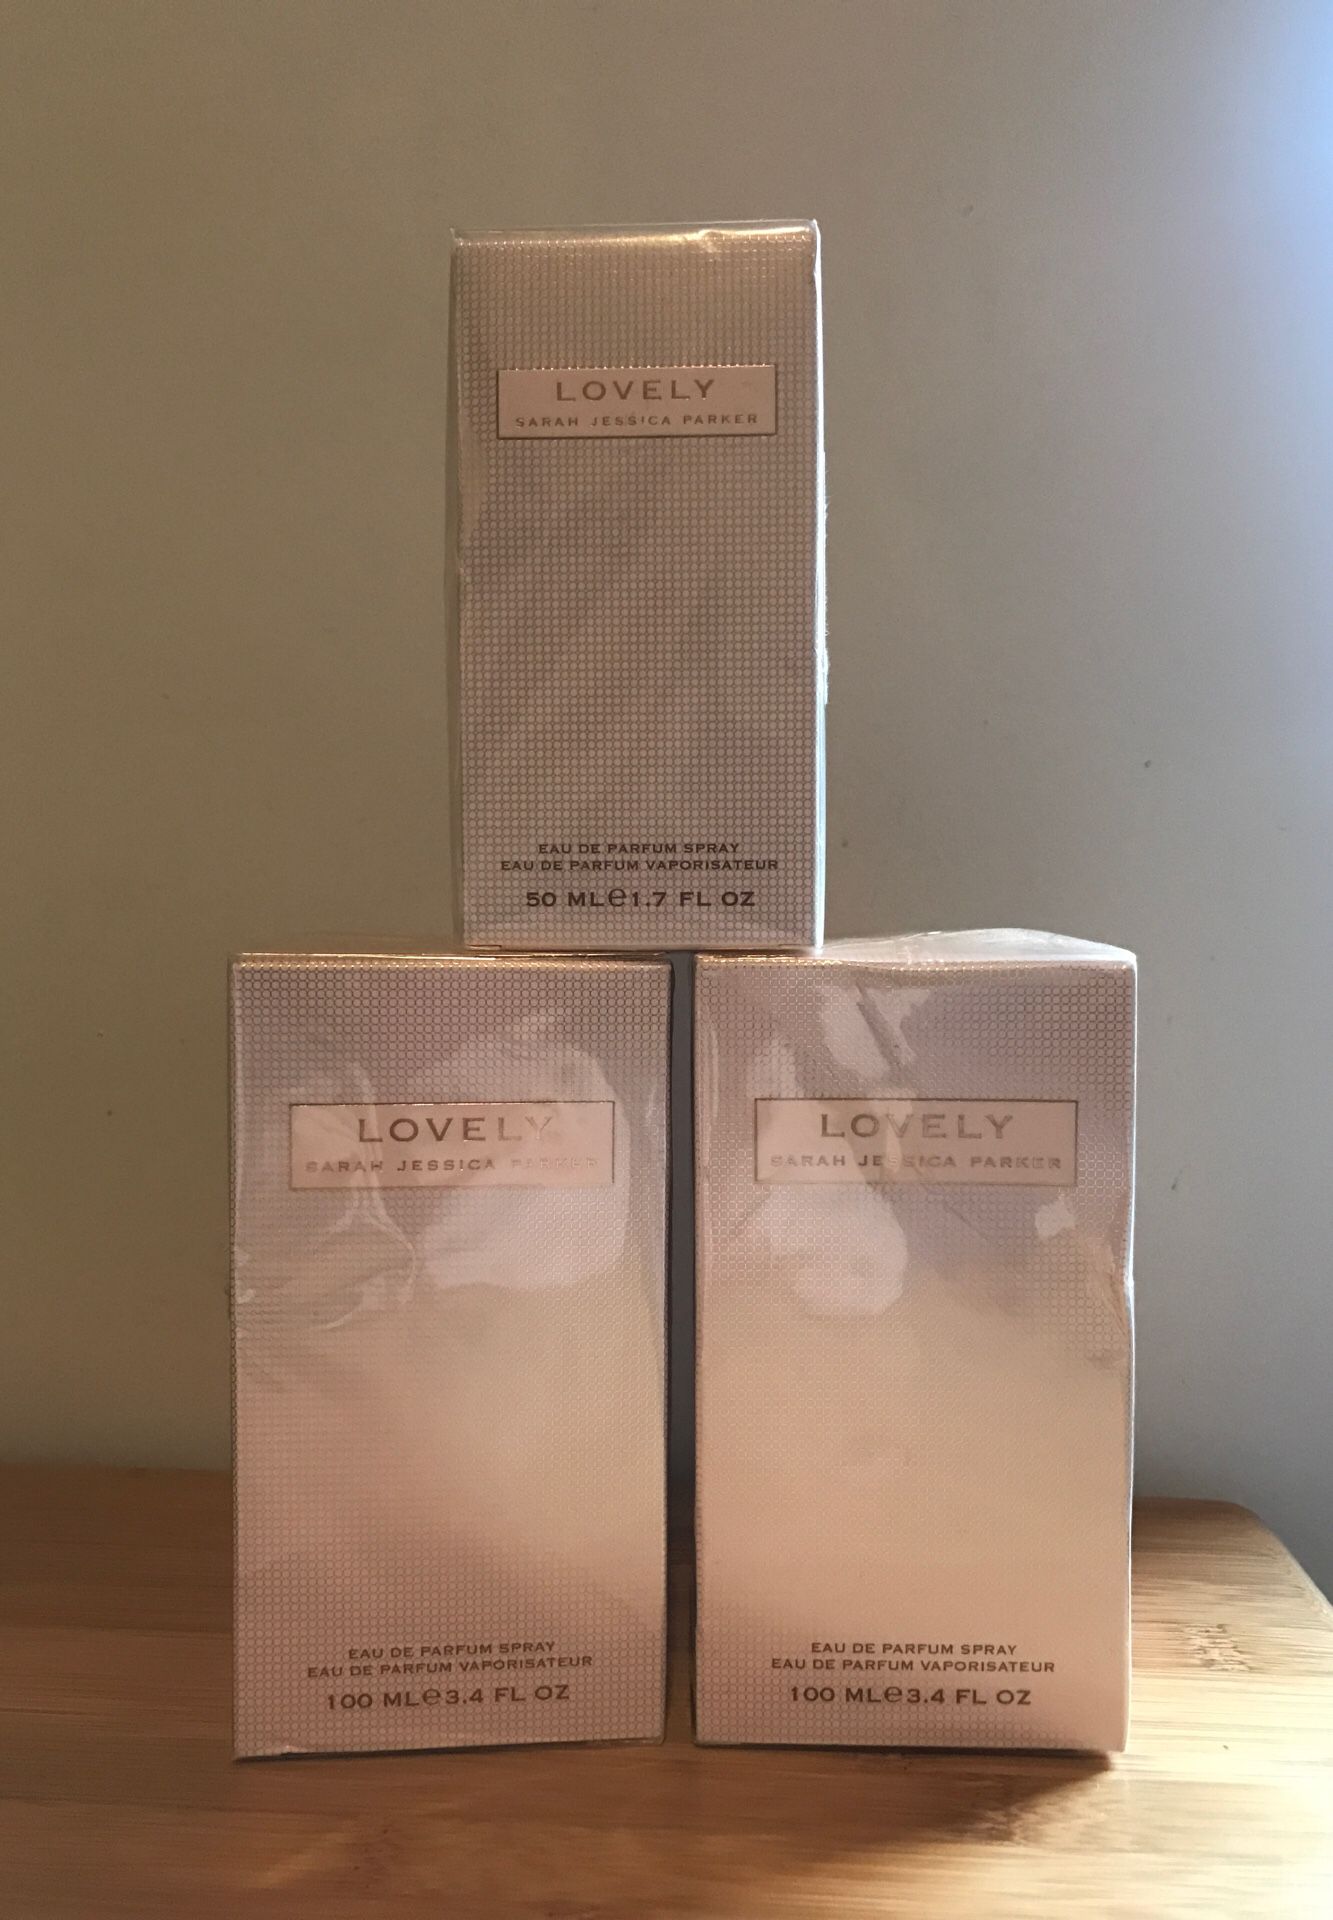 Perfume: Lovely, by Sarah Jessica Parker